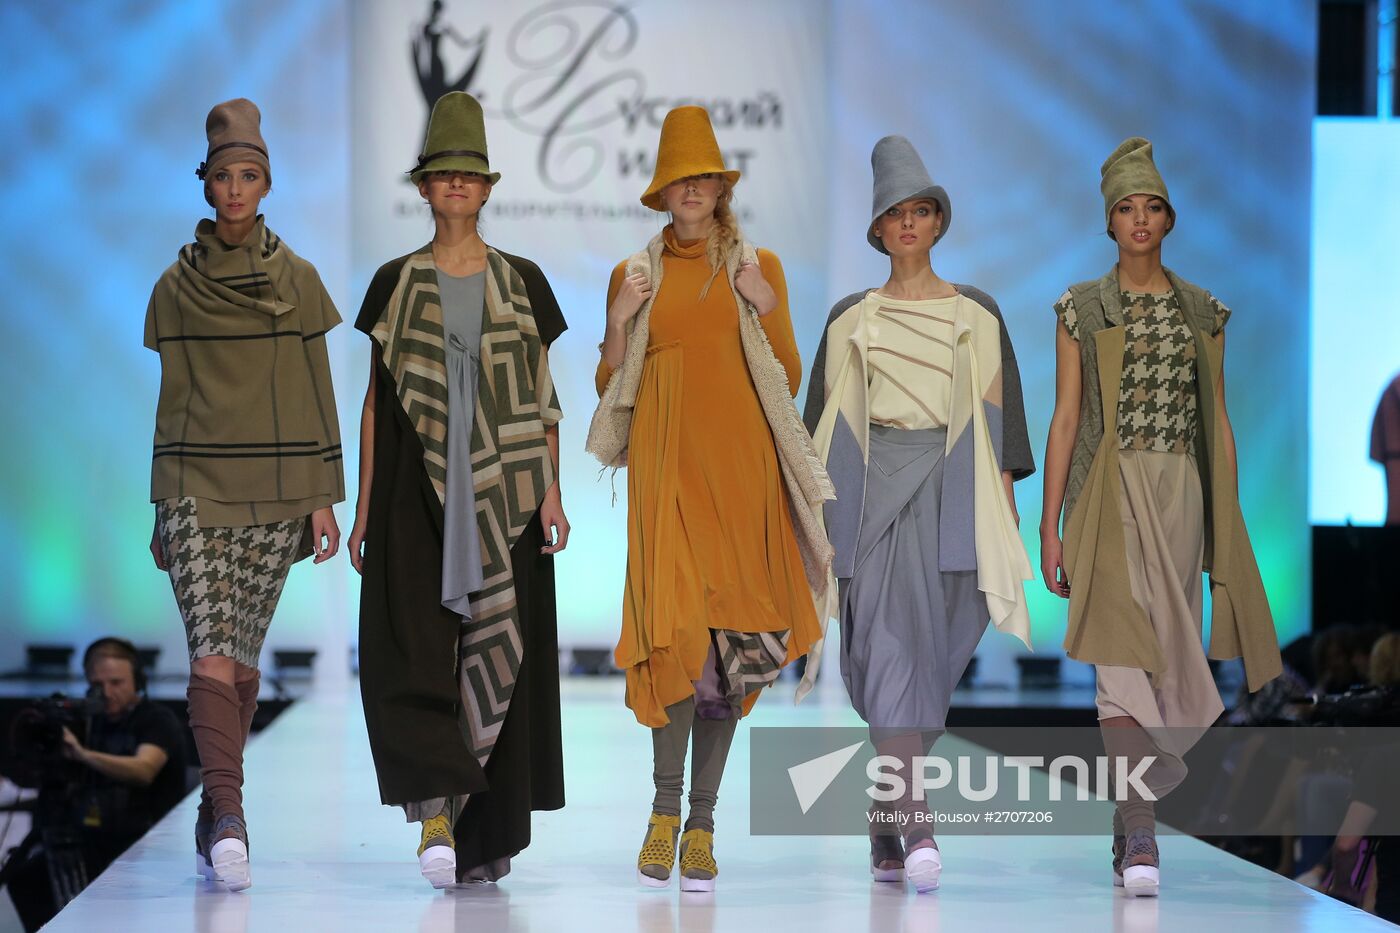 Finals of 11th Russian Silhouette International Contest of Young Designers